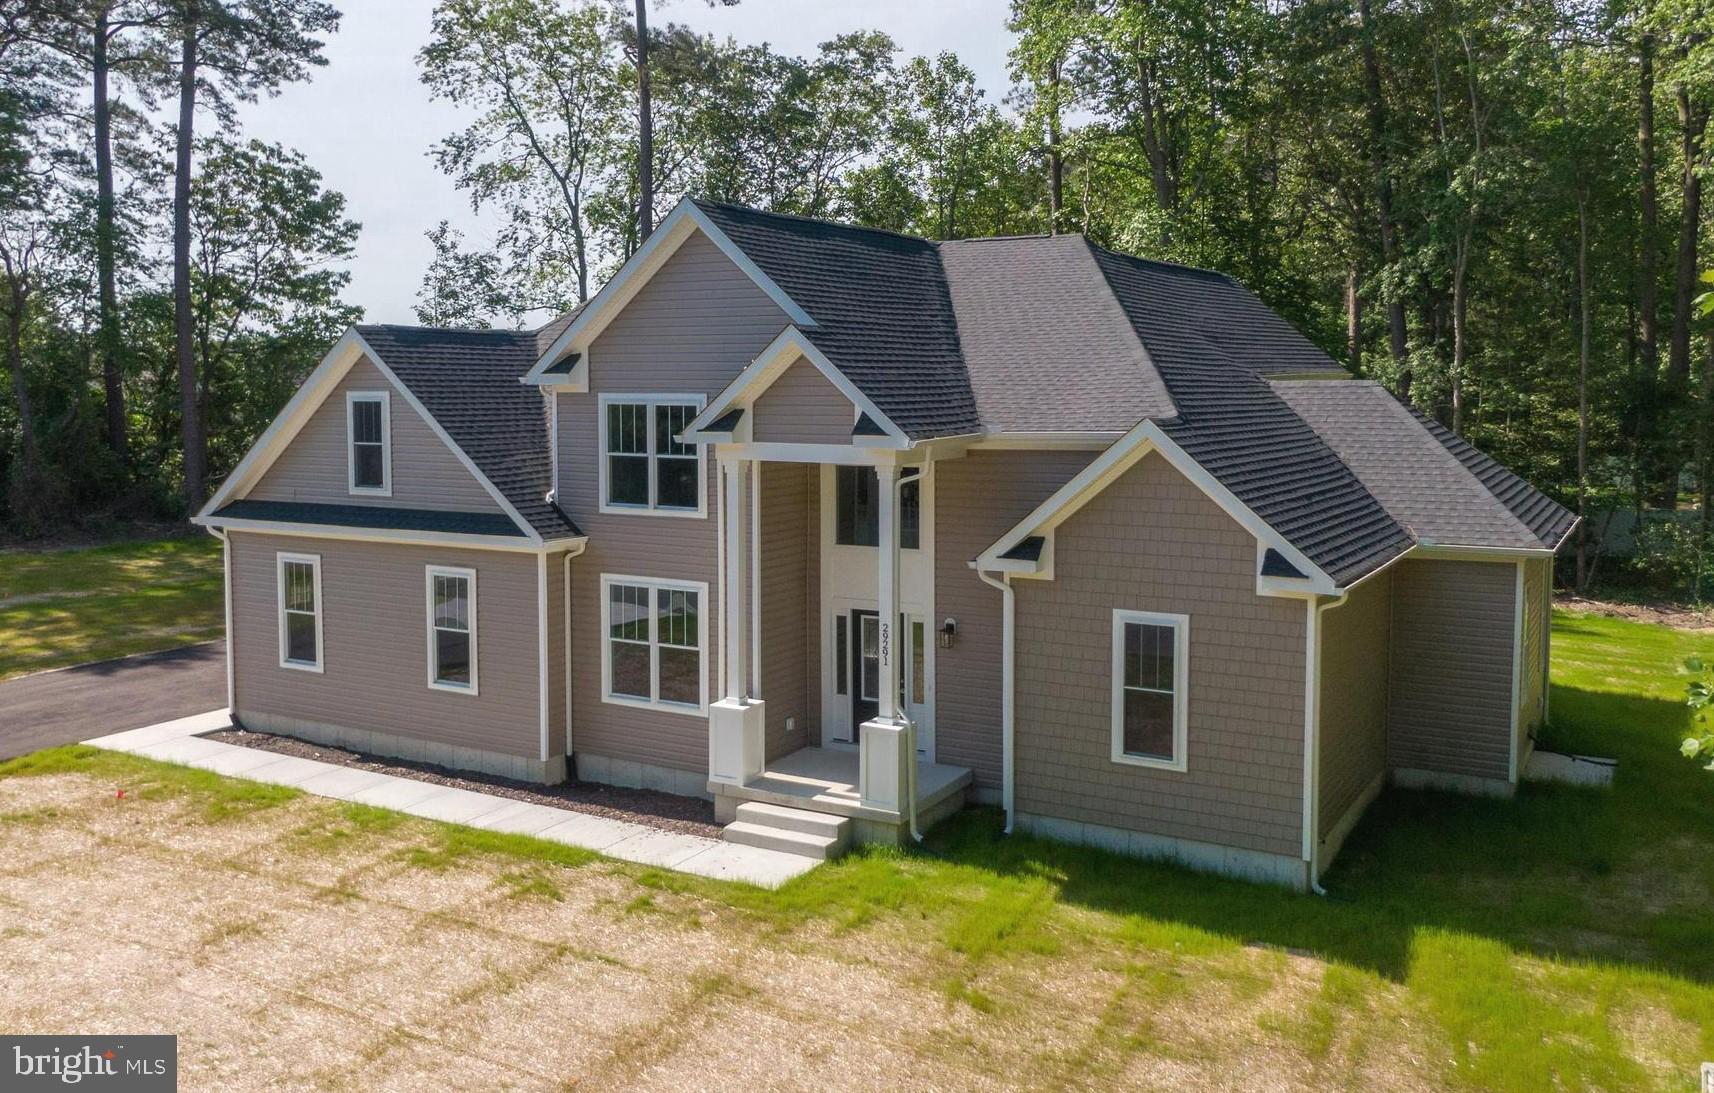 Brand New Custom Built Home on a .80 Acre Parcel in the Quiet and Private White Pine Cove community with a Beautiful Outdoor Setting just outside of Lewes and Milton with Quick and Easy access to Rt 1. A Spacious 2,800 Sq. Ft., 2 story, 4 bedroom, 3.5 bath Custom Home Built by JB Builders with a Bright Open Floor Plan with Beautiful Luxury Vinyl Plank flooring, a Custom Electric Fireplace, an Upscale Gourmet Kitchen and Formal Dining Room with a Relaxing Rear Patio, a Spacious 2 car Side Entry Garage and a Cement Conditioned Crawl Space with Sump Pump. All this along with being within minutes to all Beaches, Restaurants and Shopping . Don't Miss this Great Opportunity with a Beautiful Custom Built Home in a Quiet Setting with Terrific Value.